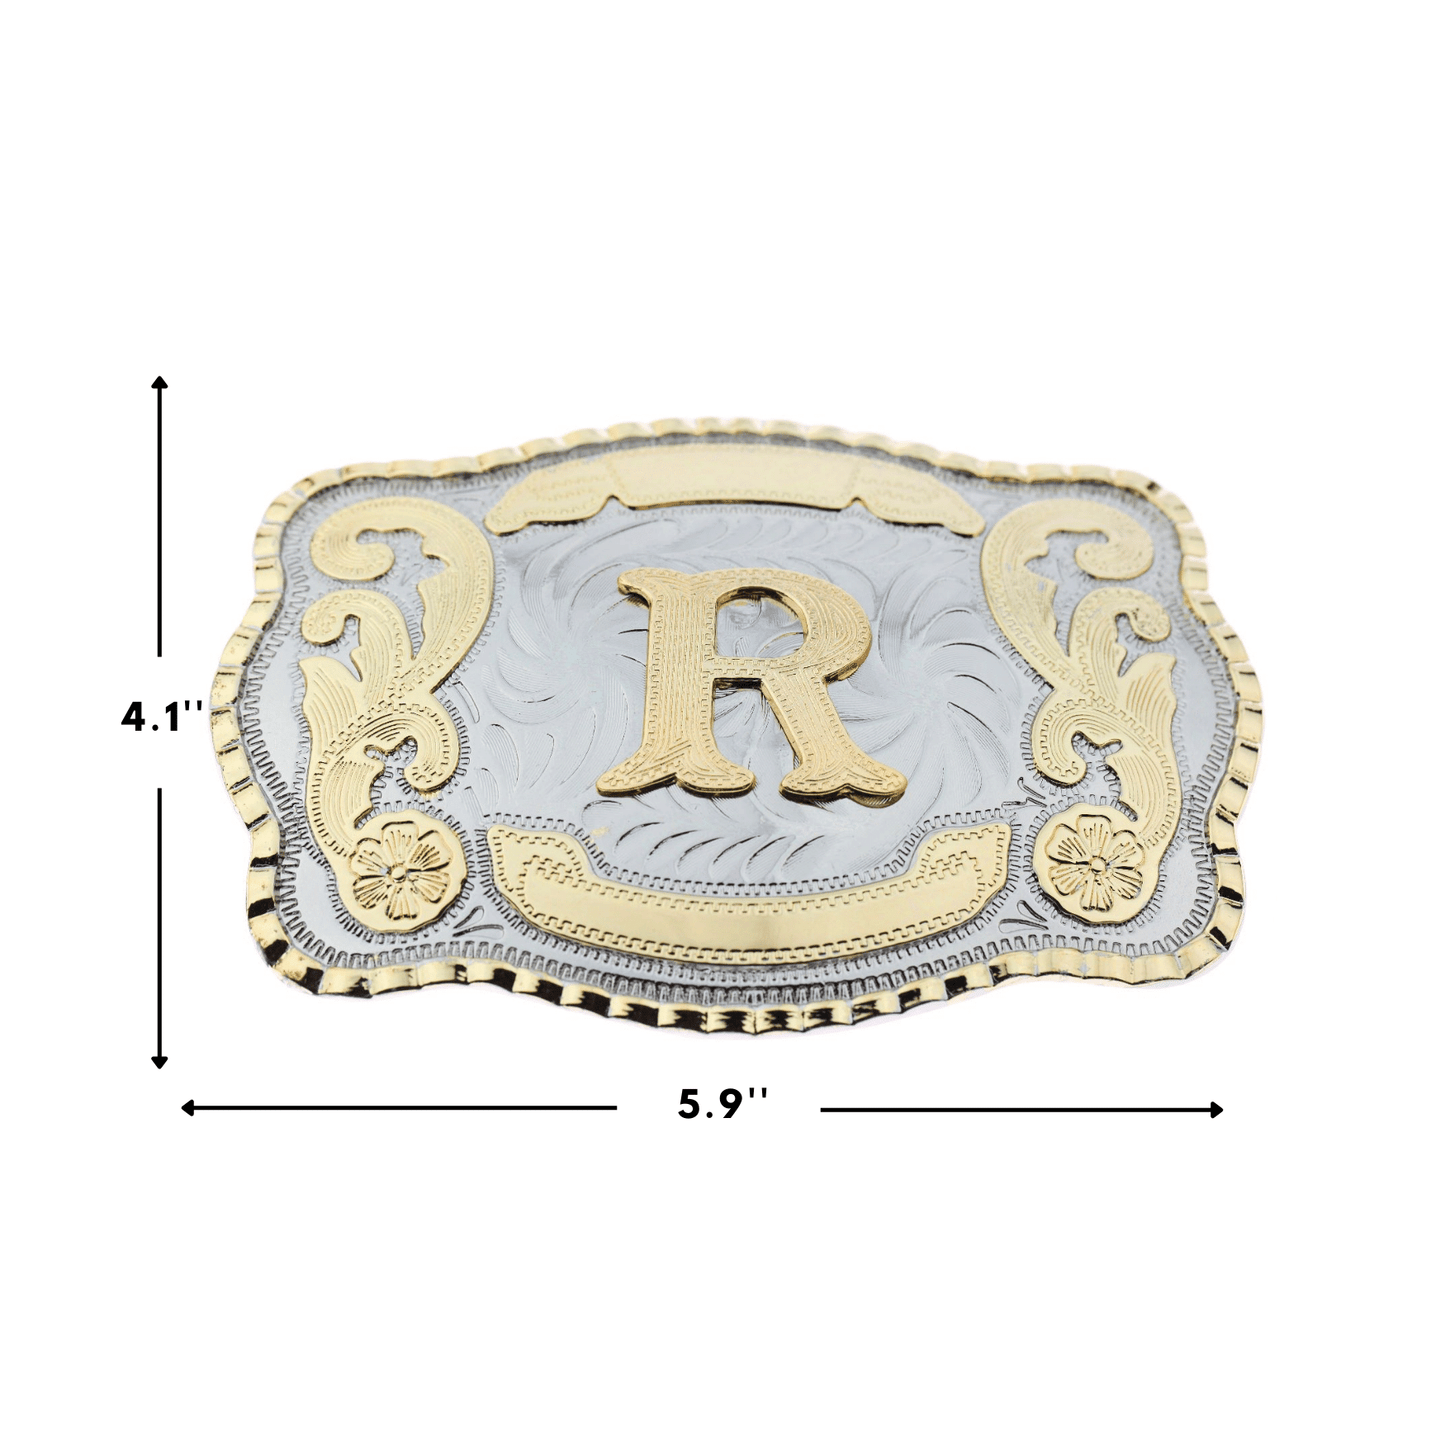 Initial Letter "R" Cowboy Rodeo Western Large Gold Tone Belt Buckle